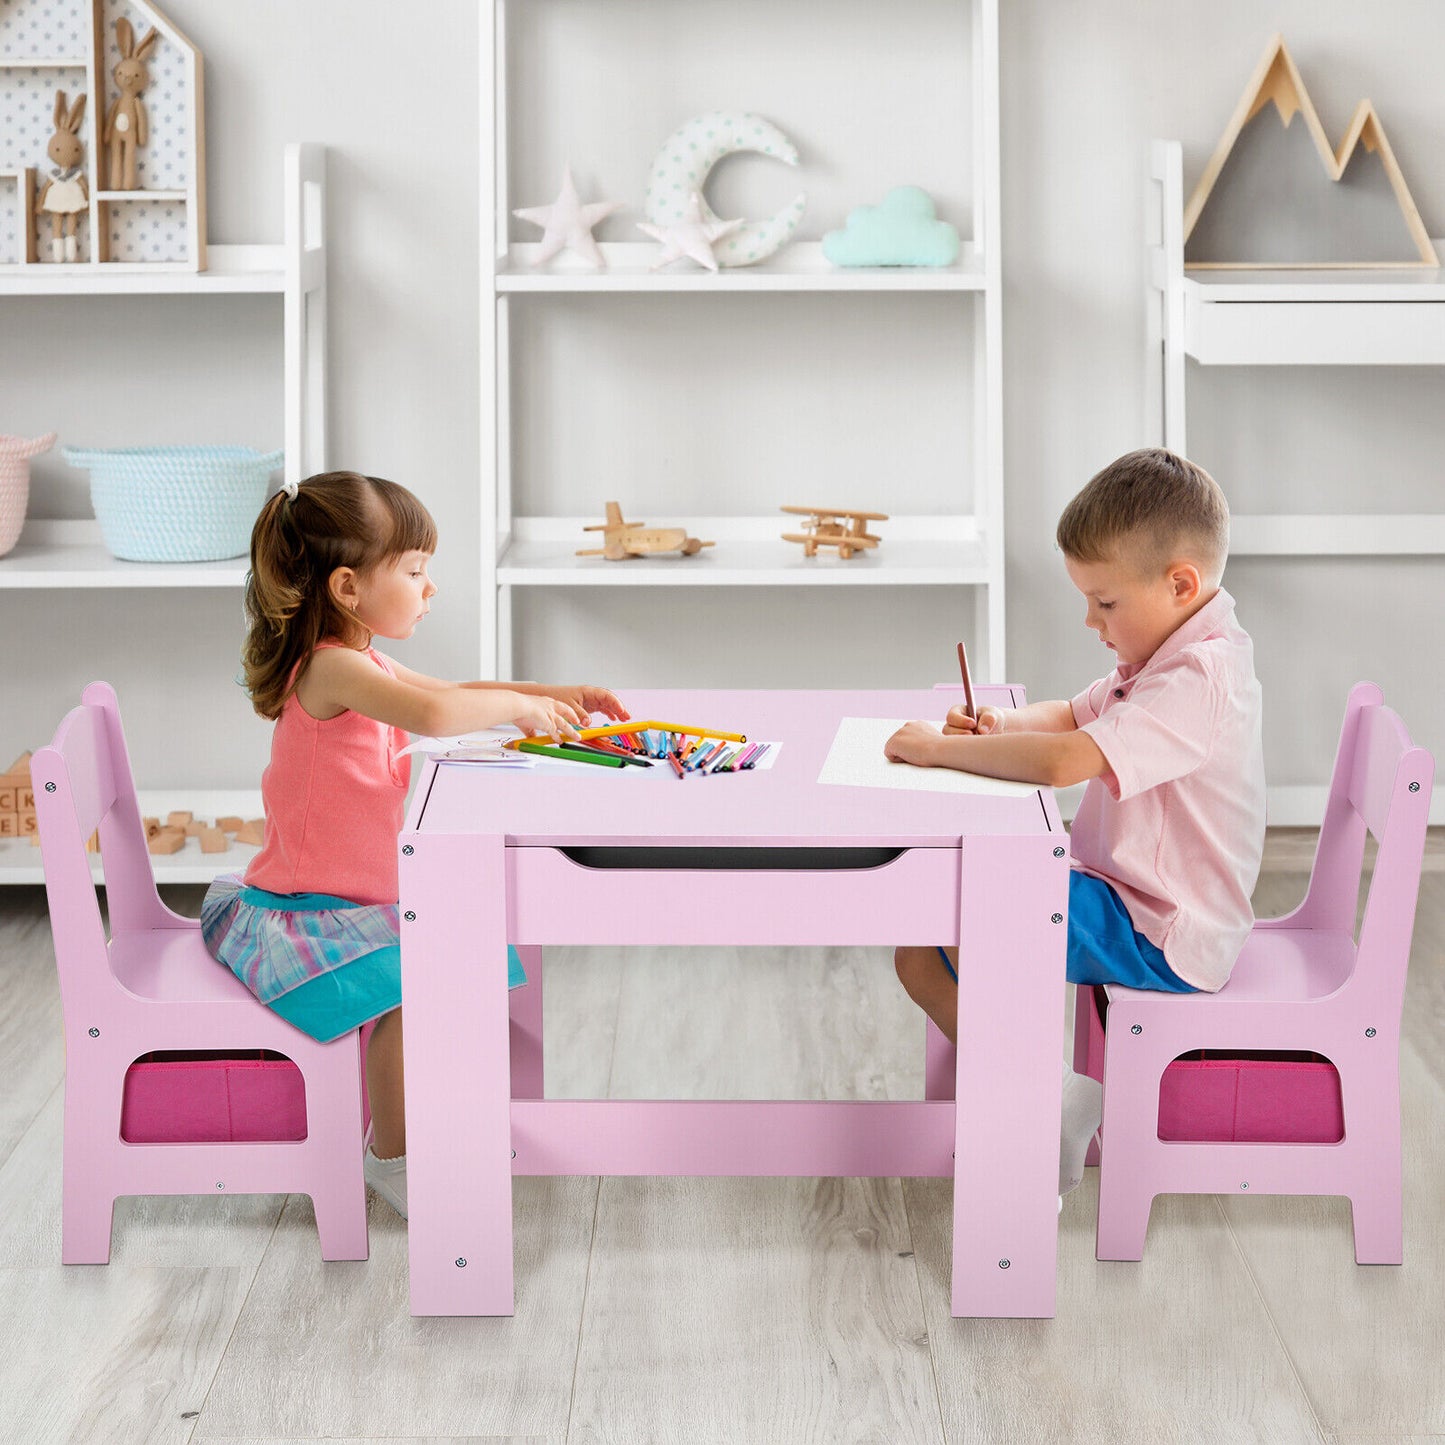 Arlopu Kids Table and 2 Chairs Set, Wooden Activity Table with Storage Drawer, Detachable Tabletop Toddler Table and Chair Set for Drawing Reading Arts & Crafts